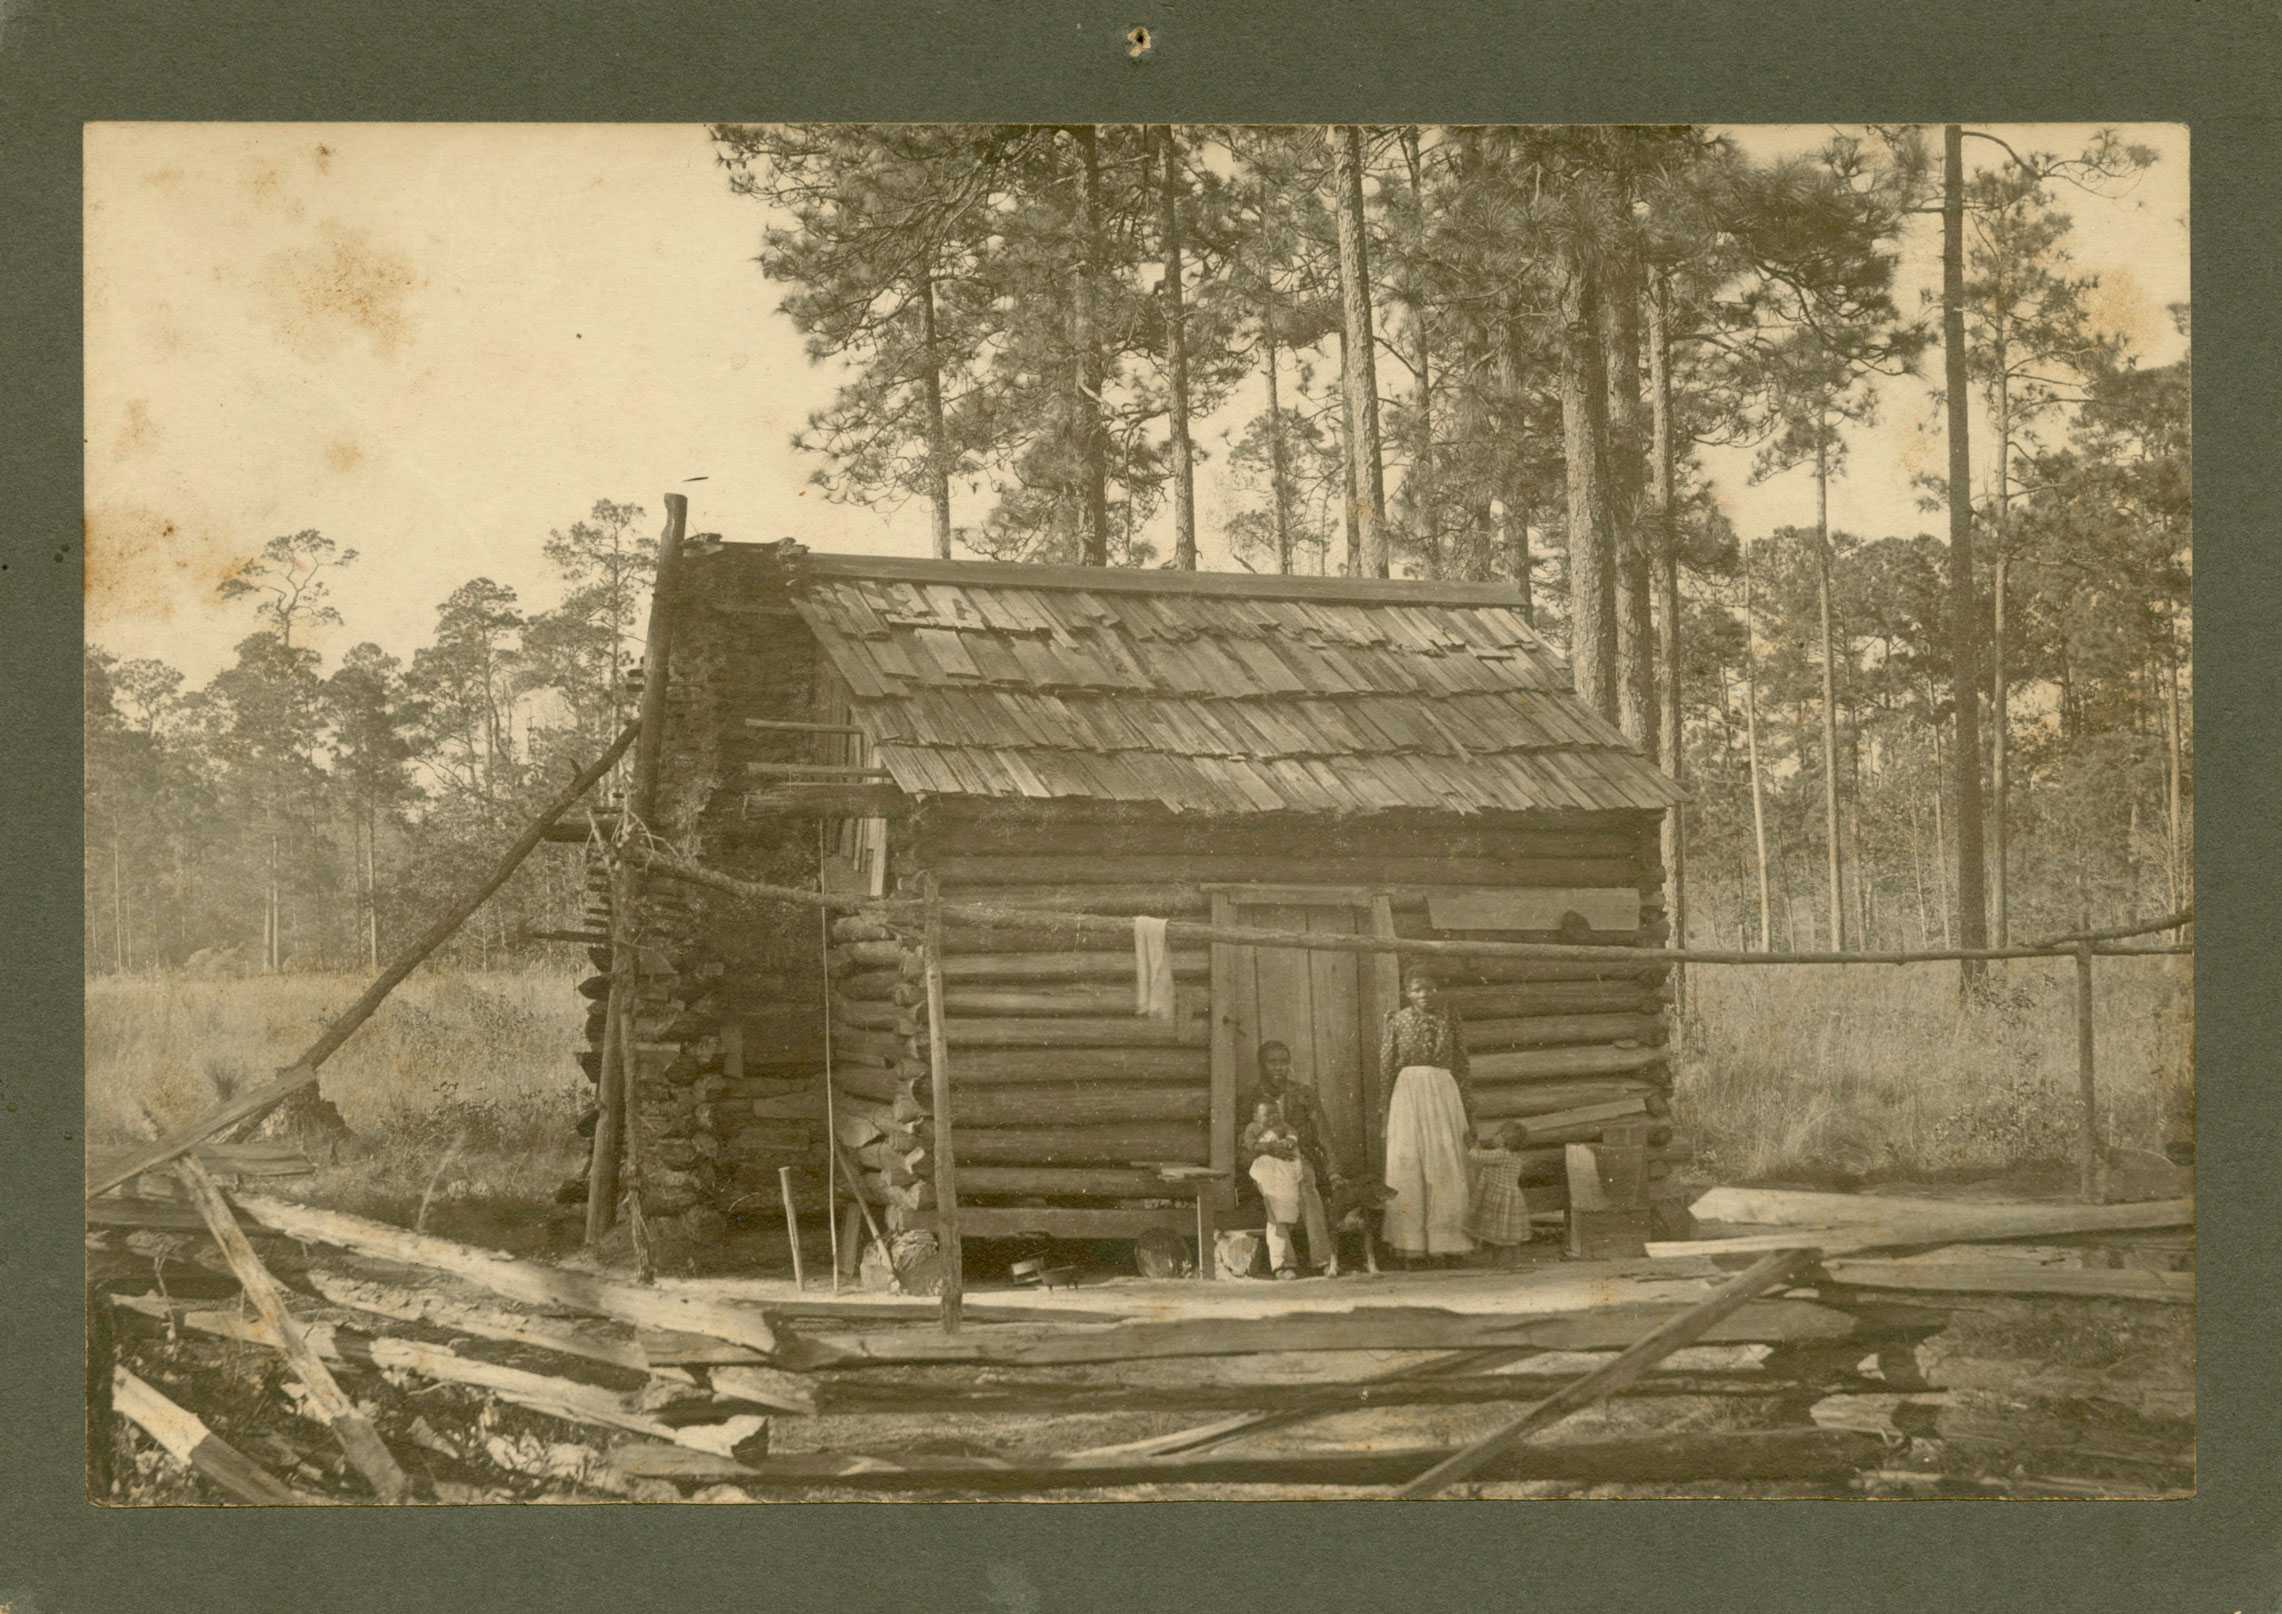 Black and White photograph of a family in front of a log cabin with dog.